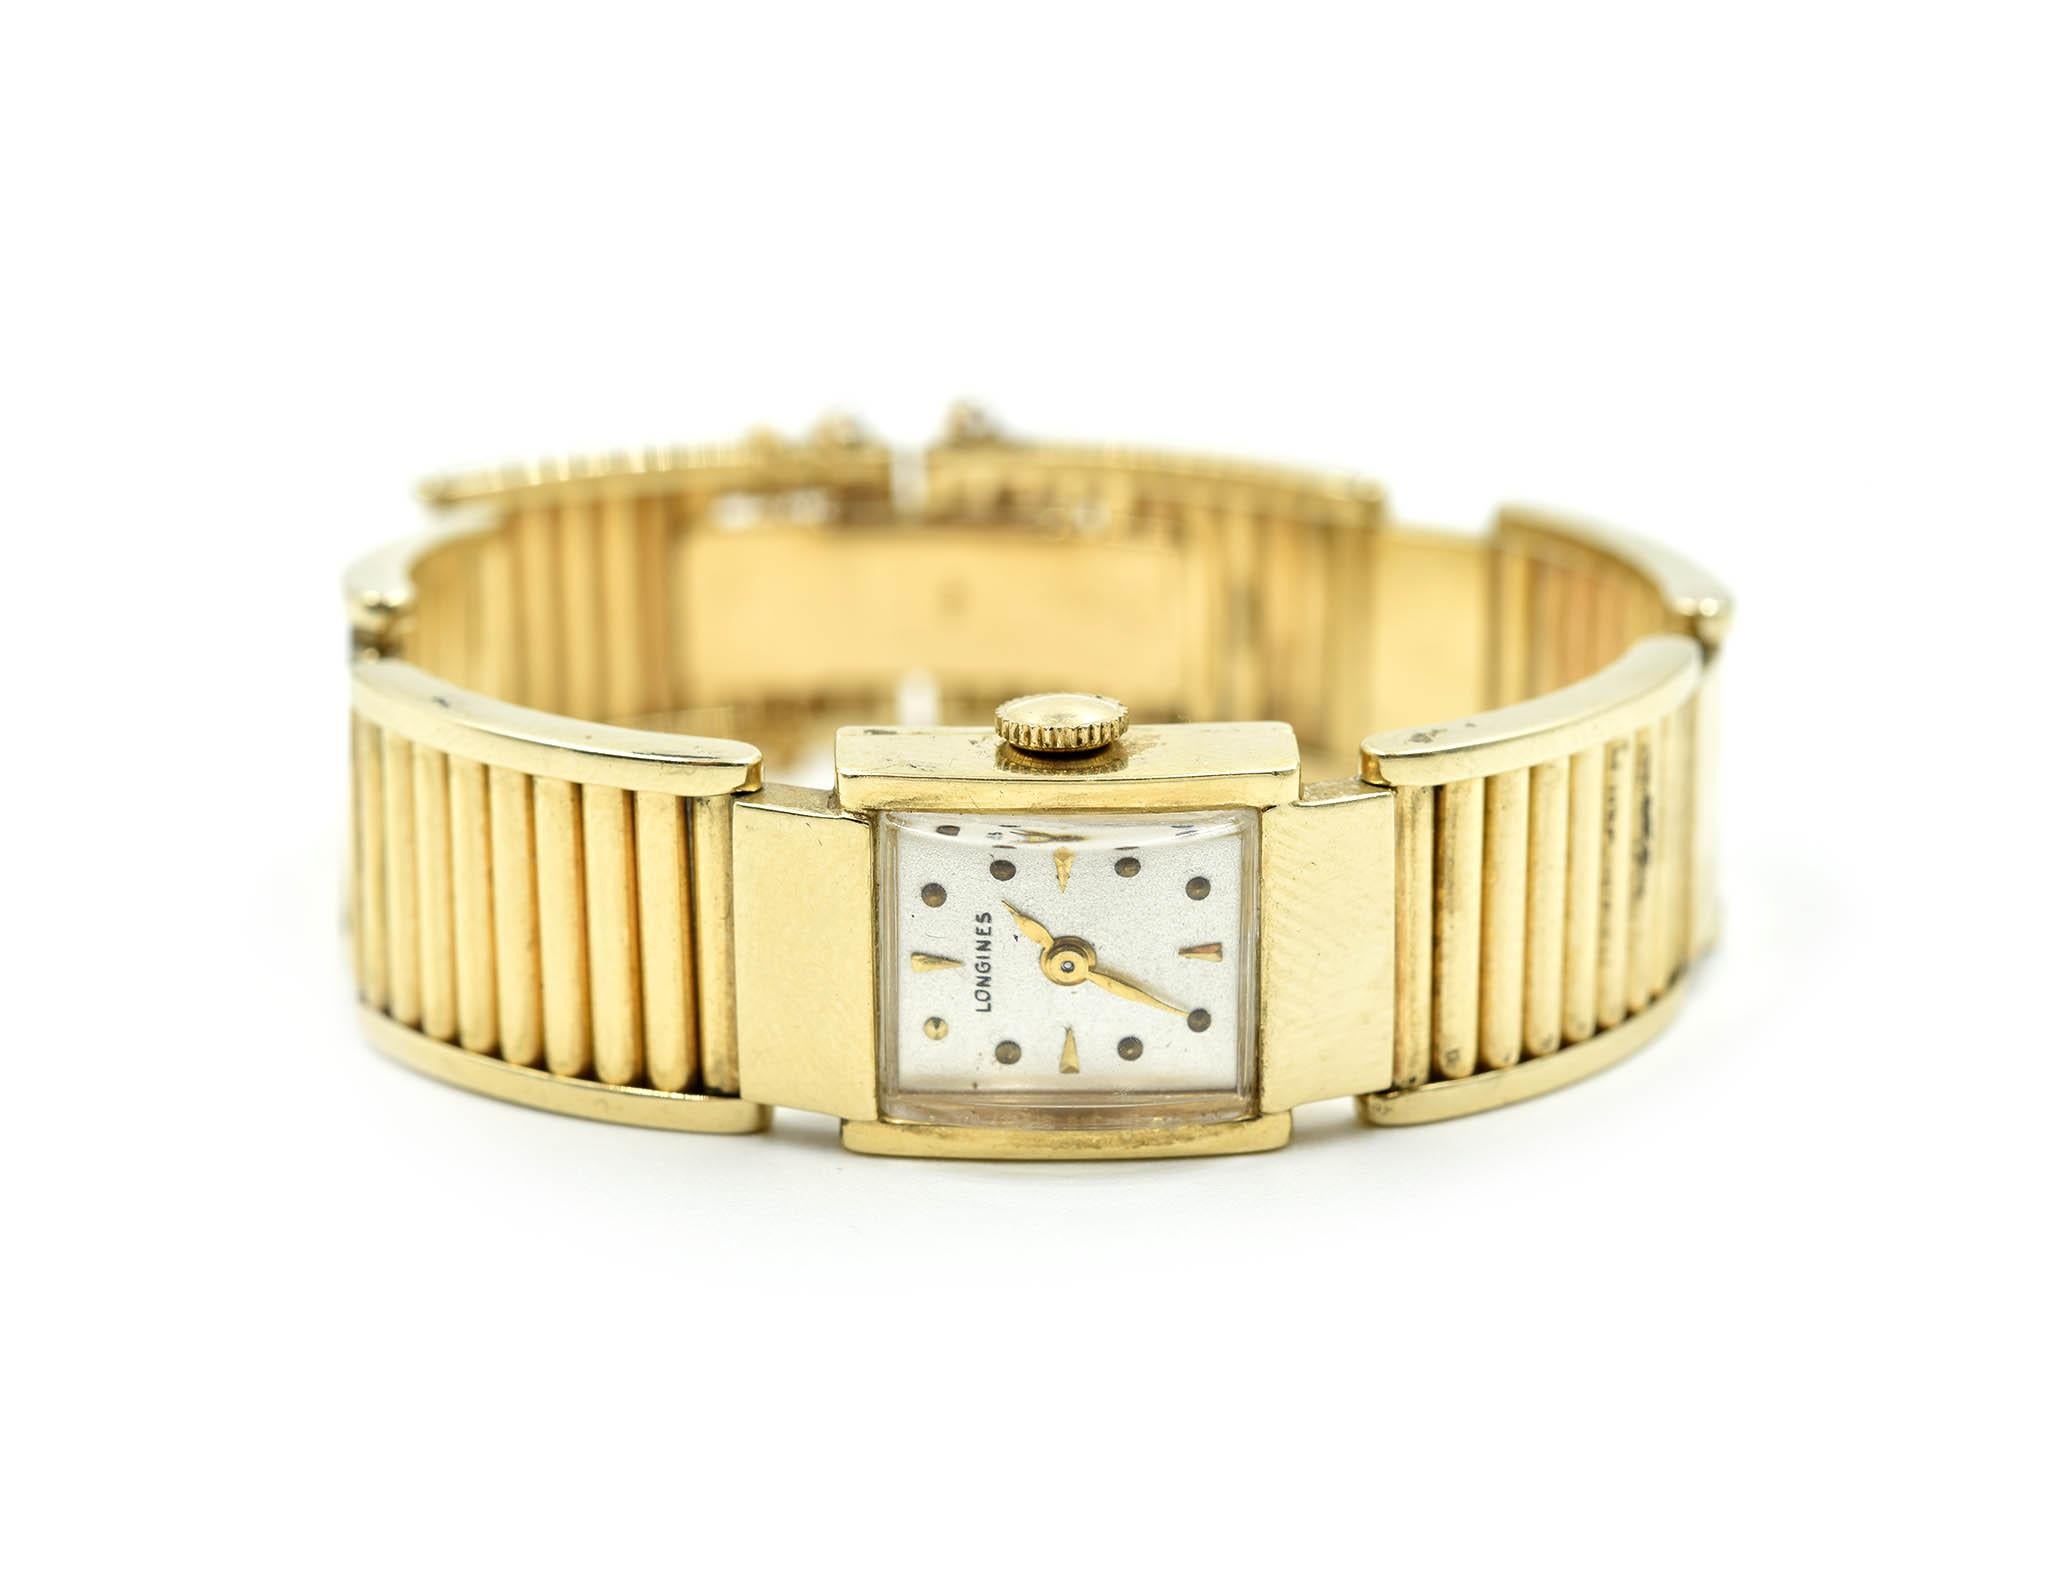 Movement: manual wind
Function: hours, minutes
Case: 14mm x 23mm rectangular 14k yellow gold case, domed plastic crystal, pull/push crown
Dial: silver dial with gold dot hour markers and arrow hour markers quarterly, gold hands
Band: solid 14k